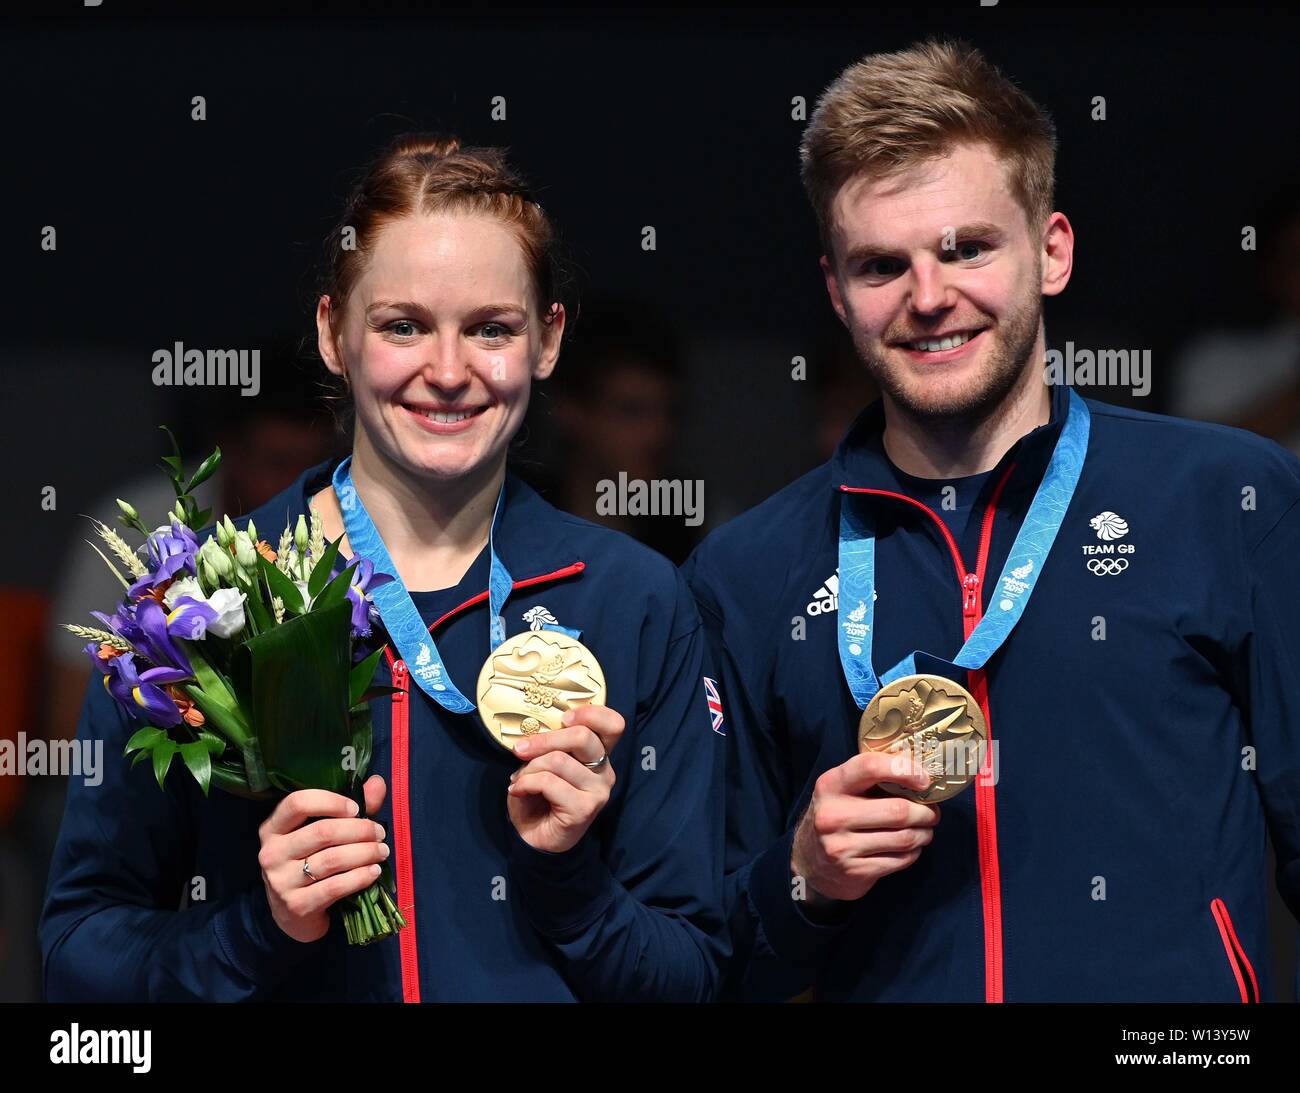 Minsk. Belarus. 30 June 2019. Lauren Smith and Marcus Ellis (GBR) in the badminton mixed doubles final with their Gold medals at the 2nd European games. Credit Garry Bowden/SIP photo agency/Alamy live news. Stock Photo